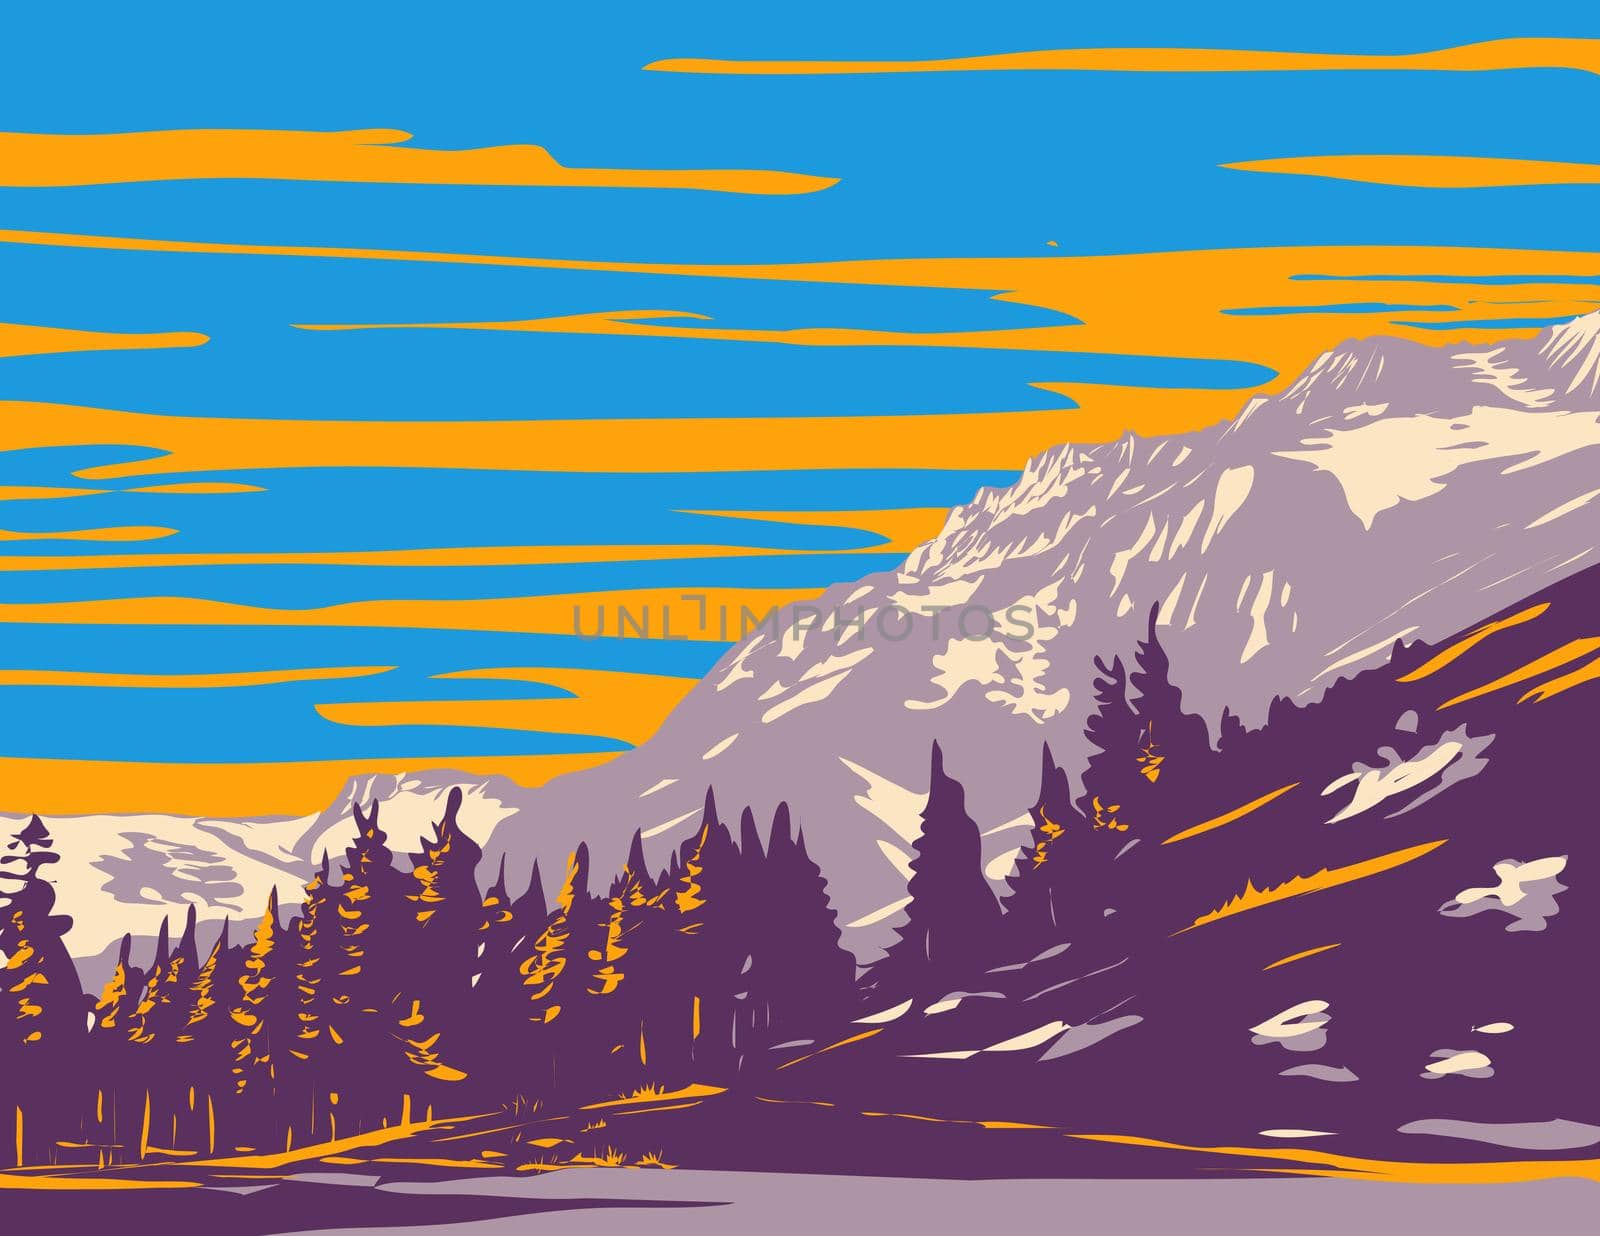 WPA poster art of Phipps Peak in the Sierra Nevada west of Emerald Bay and Lake Tahoe in El Dorado County and the Desolation Wilderness, California, USA done in works project administration style.